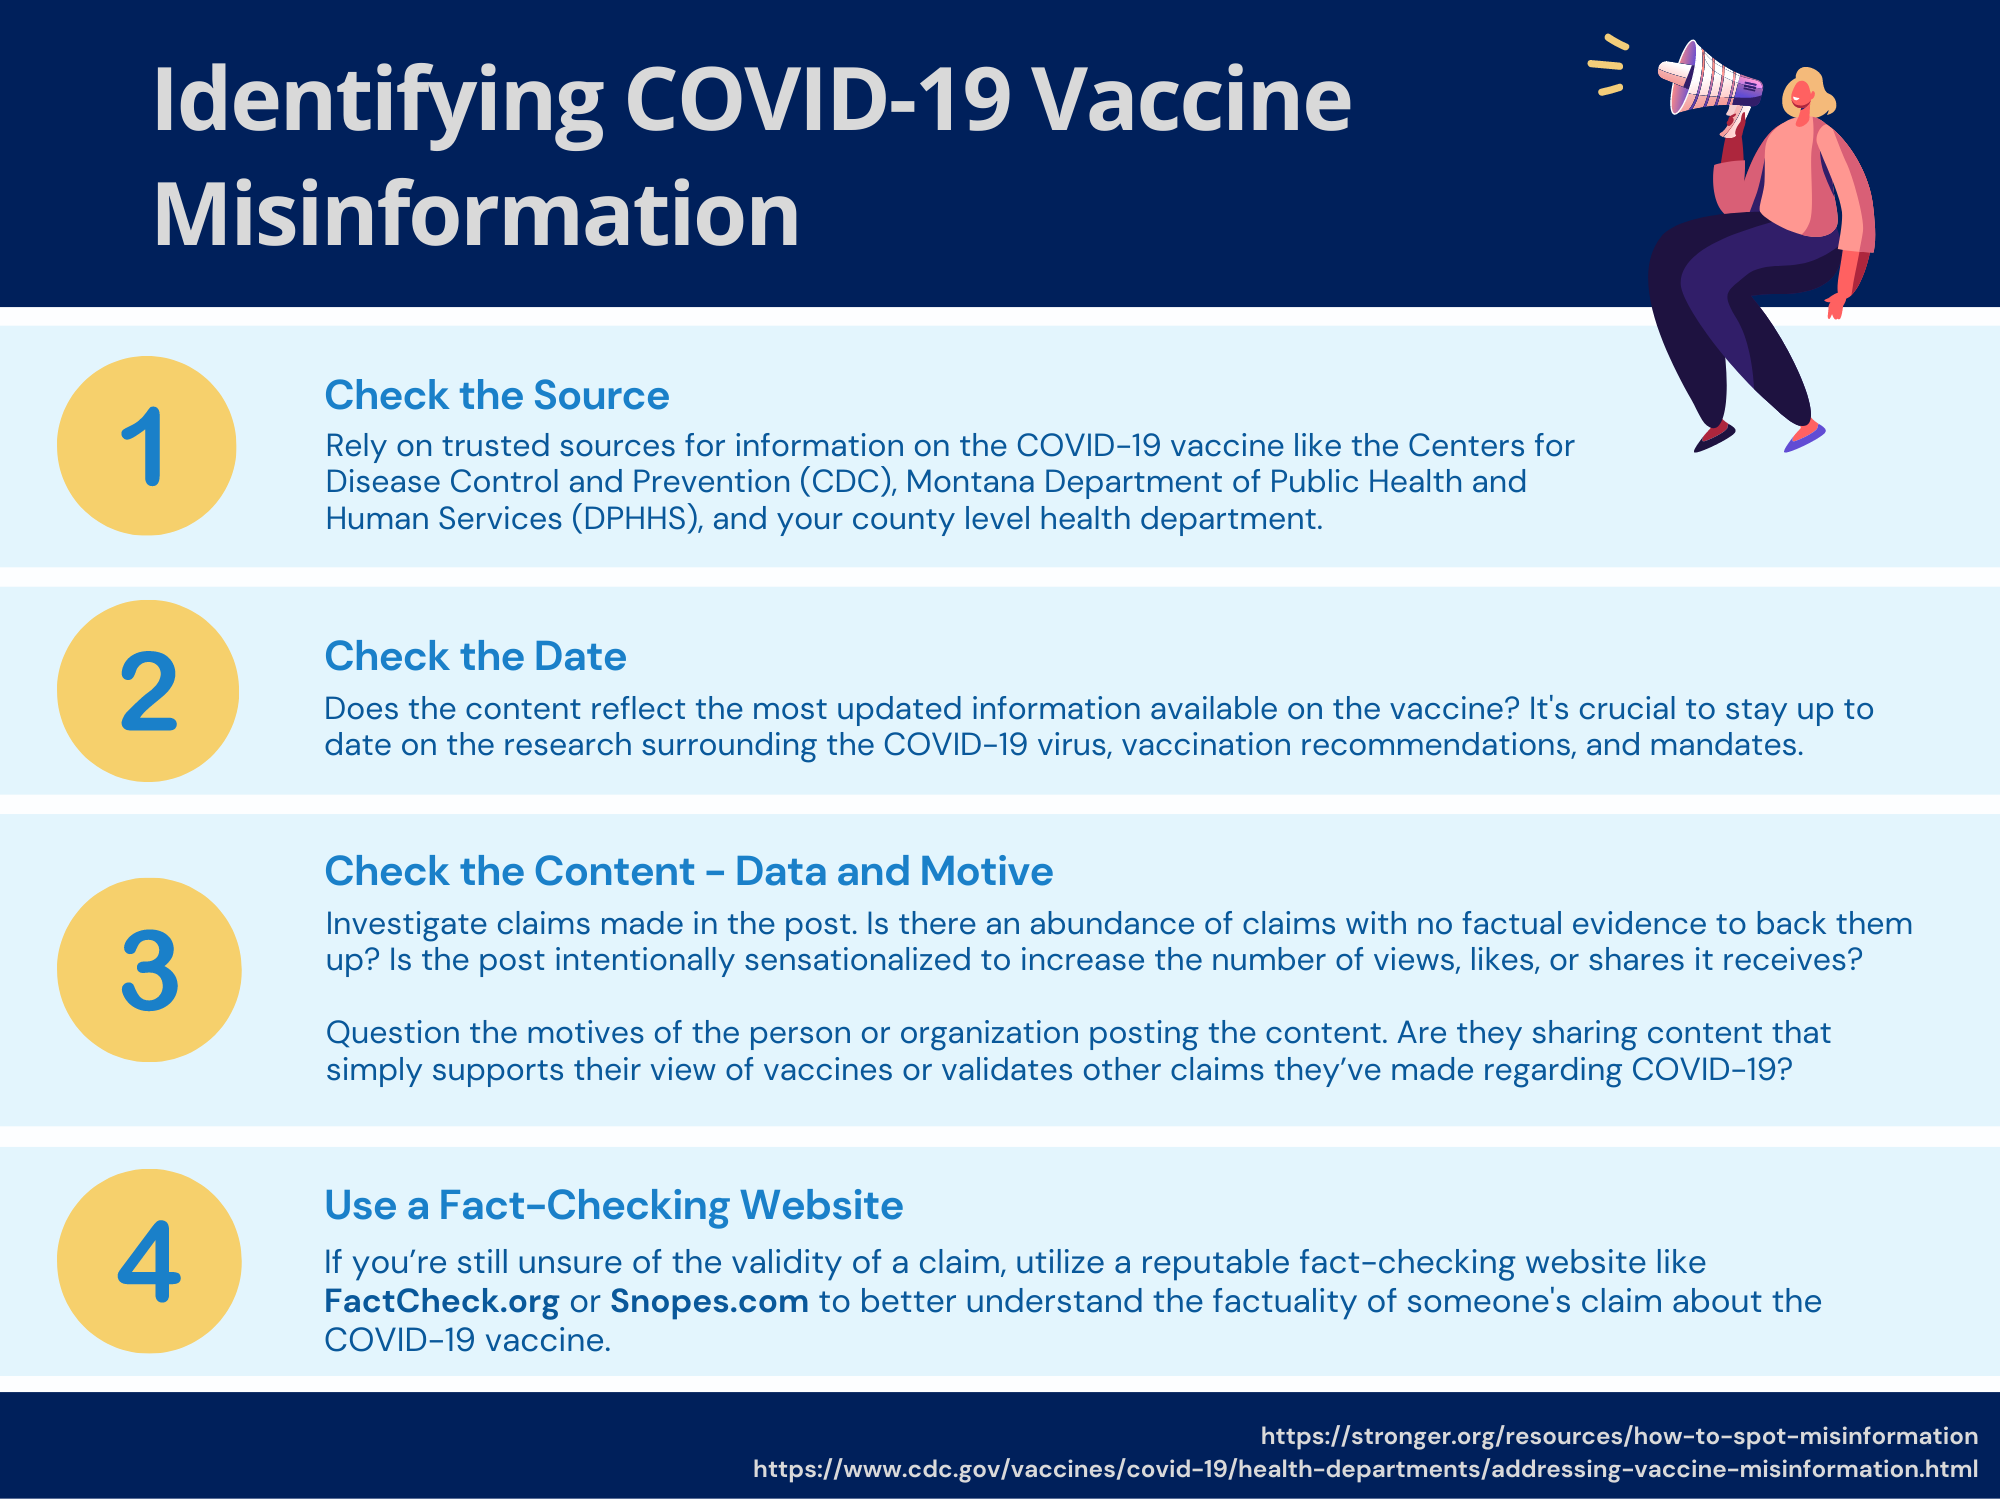 1. Check the Source. Rely on trusted sources for information on the COVID-19 vaccine like the Centers for Disease Control and Prevention (CDC), Montana Department of Public Health and Human Services (DPHHS), and your county level health department. 2. Check the date. Does the content reflect the most updated information available on the vaccine? It's crucial to stay up to date on the research surrounding the COVID-19 virus, vaccination recommendations, and mandates. 3. Check the Content - Data and Motive. Investigate claims made in the post. Is there an abundance of claims with no factual evidence to back them up? Is the post intentionally sensationalized to increase the number of views, likes, or shares it receives?  Question the motives of the person or organization posting the content. Are they sharing content that simply supports their view of vaccines or validates other claims they’ve made regarding COVID-19? 4. Use a Fact-Checking Website. If you’re still unsure of the validity of a claim, utilize a reputable fact-checking website like FactCheck.org or Snopes.com to better understand the factuality of someone's claim about the COVID-19 vaccine.